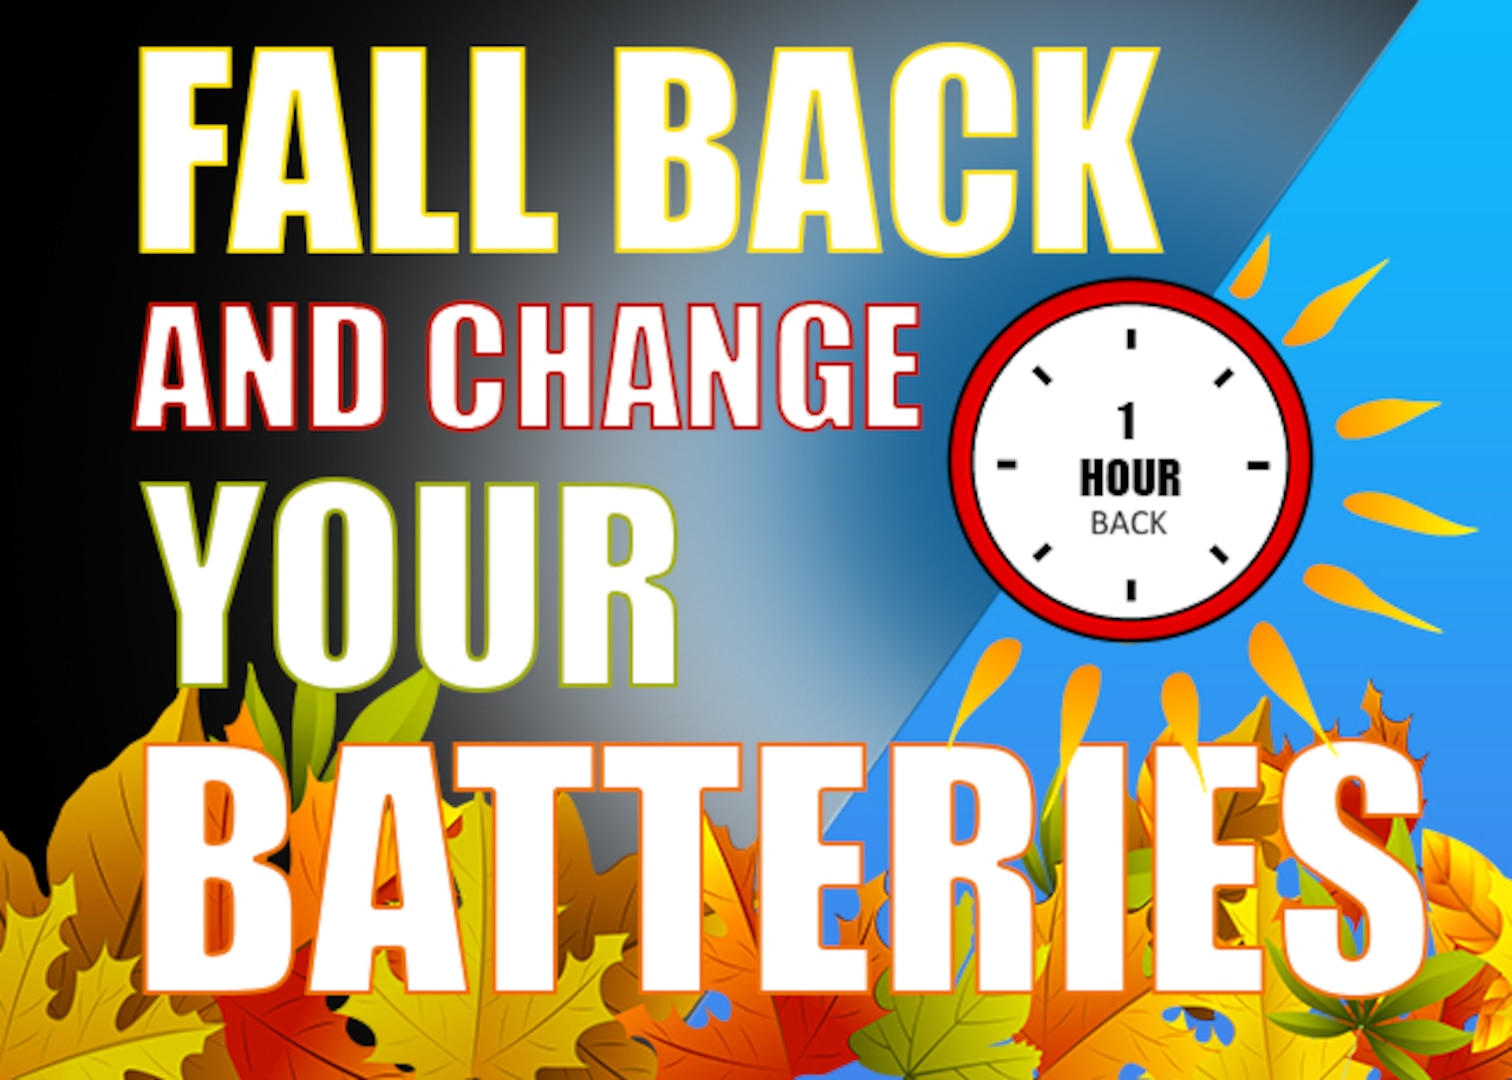 Fall Back Change your clocks, batteries during daylight saving time